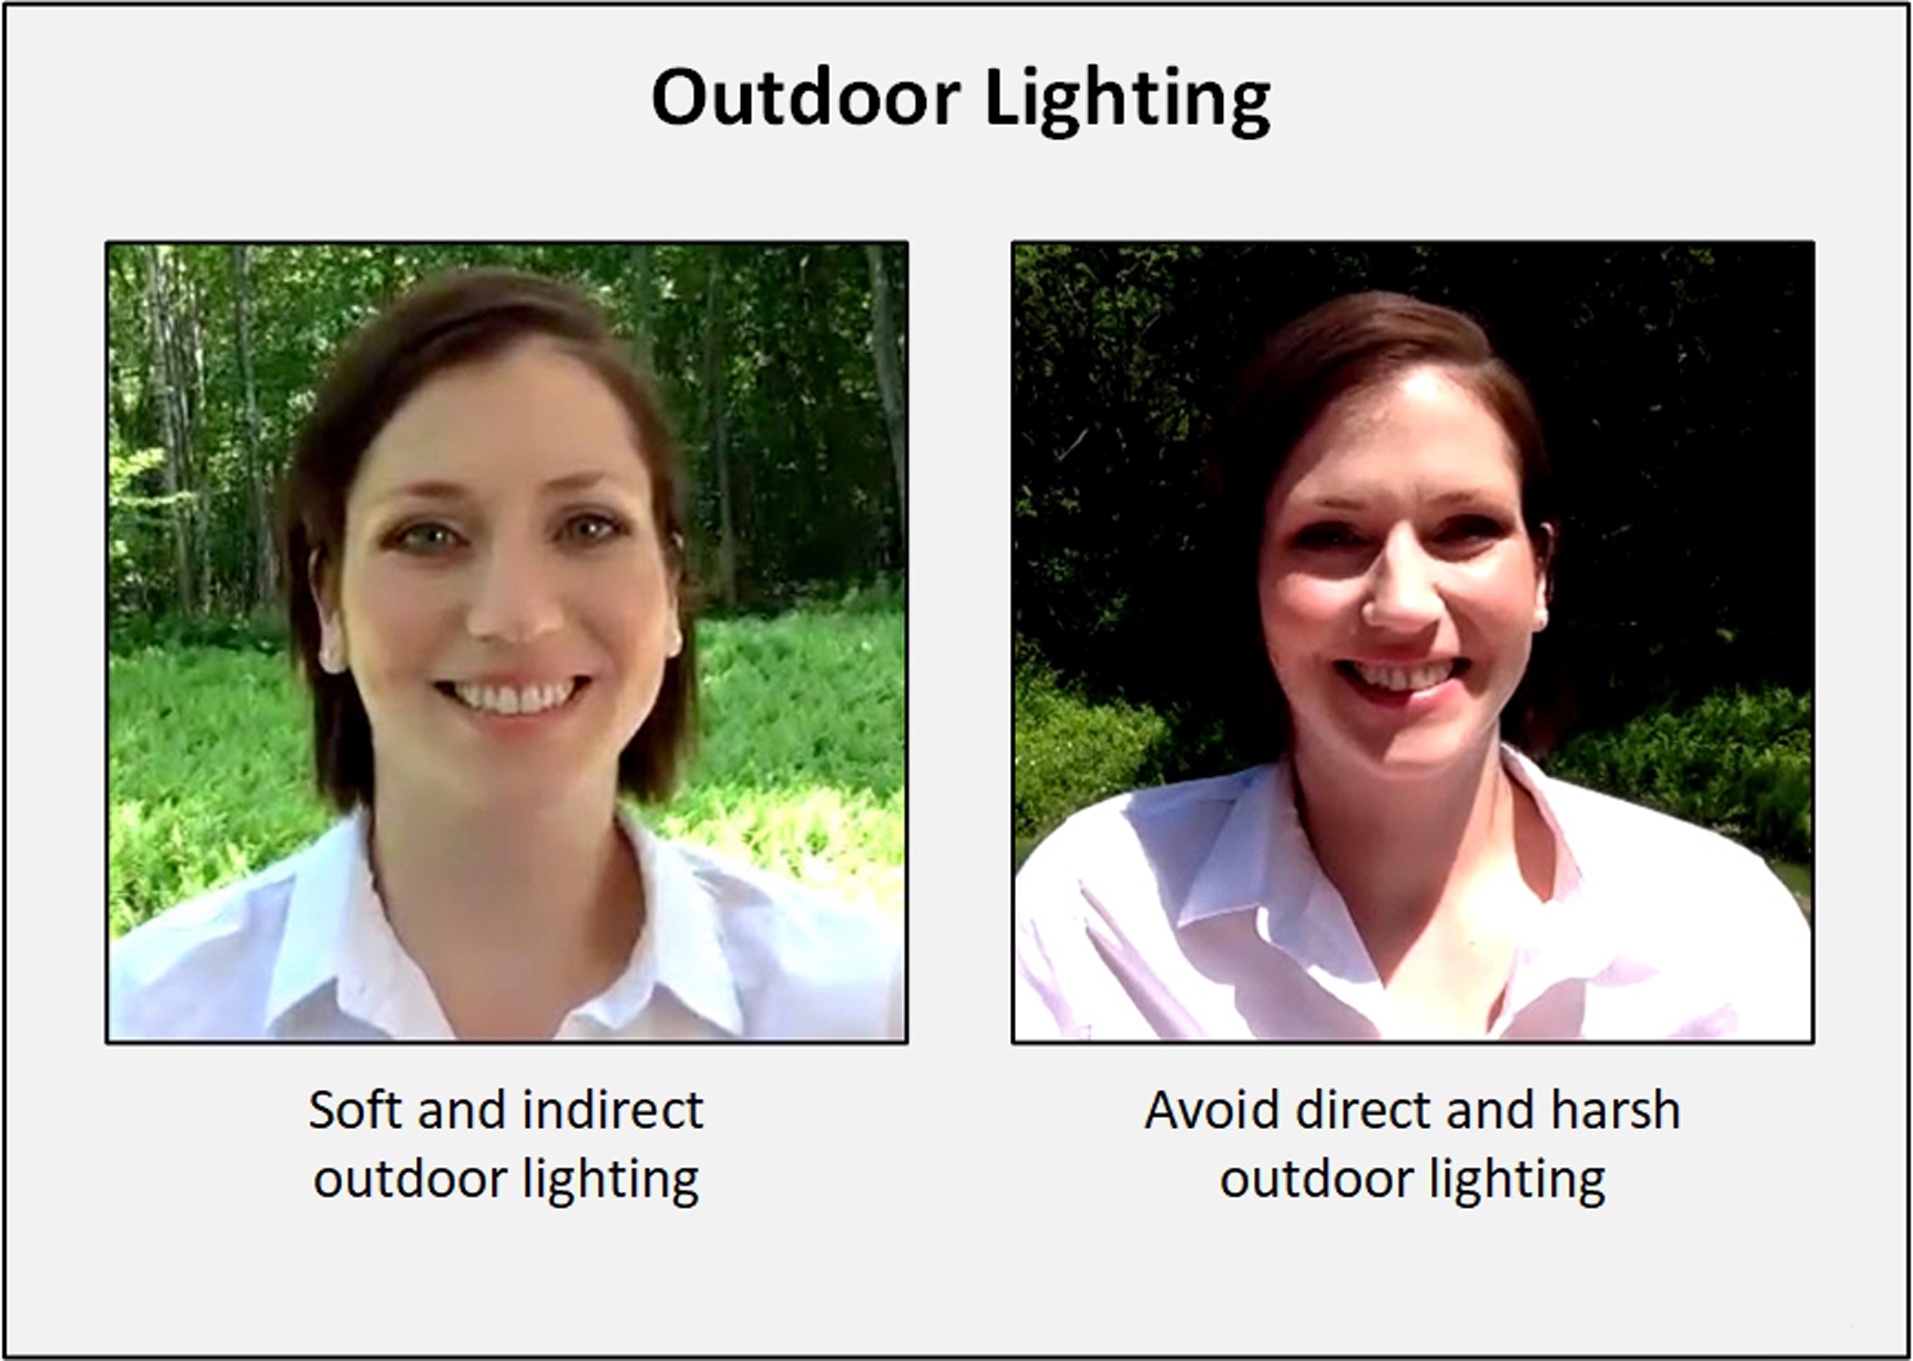 Examples of outdoor lighting comparing soft/indirect to harsh/direct.